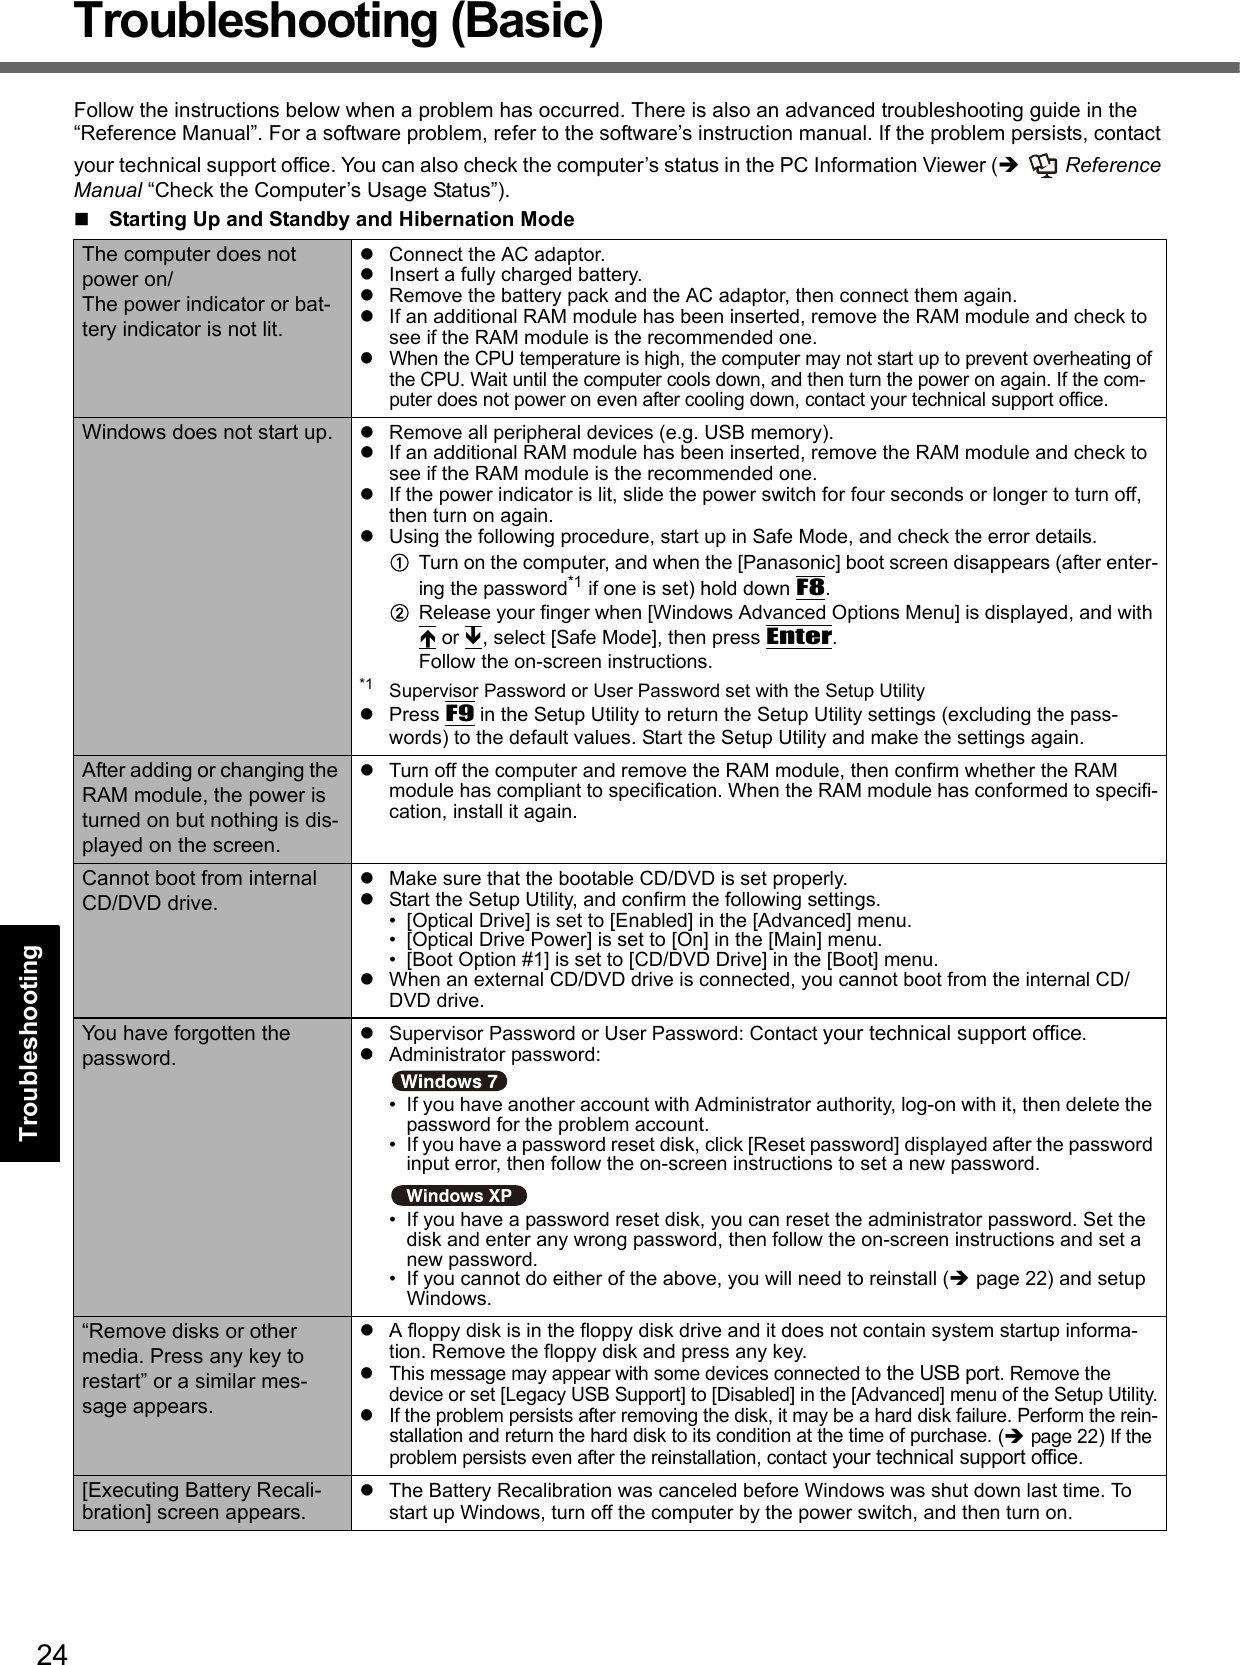 24Getting StartedUseful InformationTroubleshootingAppendixTroubleshooting (Basic)Follow the instructions below when a problem has occurred. There is also an advanced troubleshooting guide in the “Reference Manual”. For a software problem, refer to the software’s instruction manual. If the problem persists, contact your technical support office. You can also check the computer’s status in the PC Information Viewer (Î Reference Manual “Check the Computer’s Usage Status”).Starting Up and Standby and Hibernation ModeThe computer does not power on/The power indicator or bat-tery indicator is not lit.zConnect the AC adaptor.zInsert a fully charged battery.zRemove the battery pack and the AC adaptor, then connect them again. zIf an additional RAM module has been inserted, remove the RAM module and check to see if the RAM module is the recommended one.zWhen the CPU temperature is high, the computer may not start up to prevent overheating of the CPU. Wait until the computer cools down, and then turn the power on again. If the com-puter does not power on even after cooling down, contact your technical support office.Windows does not start up. zRemove all peripheral devices (e.g. USB memory).zIf an additional RAM module has been inserted, remove the RAM module and check to see if the RAM module is the recommended one.zIf the power indicator is lit, slide the power switch for four seconds or longer to turn off, then turn on again.zUsing the following procedure, start up in Safe Mode, and check the error details.ATurn on the computer, and when the [Panasonic] boot screen disappears (after enter-ing the password*1 if one is set) hold down F8.BRelease your finger when [Windows Advanced Options Menu] is displayed, and with Ï or Ð, select [Safe Mode], then press Enter.Follow the on-screen instructions.*1 Supervisor Password or User Password set with the Setup UtilityzPress F9 in the Setup Utility to return the Setup Utility settings (excluding the pass-words) to the default values. Start the Setup Utility and make the settings again.After adding or changing the RAM module, the power is turned on but nothing is dis-played on the screen.zTurn off the computer and remove the RAM module, then confirm whether the RAM module has compliant to specification. When the RAM module has conformed to specifi-cation, install it again.Cannot boot from internal CD/DVD drive.zMake sure that the bootable CD/DVD is set properly.zStart the Setup Utility, and confirm the following settings.• [Optical Drive] is set to [Enabled] in the [Advanced] menu.• [Optical Drive Power] is set to [On] in the [Main] menu.• [Boot Option #1] is set to [CD/DVD Drive] in the [Boot] menu.zWhen an external CD/DVD drive is connected, you cannot boot from the internal CD/DVD drive.You have forgotten the password.zSupervisor Password or User Password: Contact your technical support office.zAdministrator password: • If you have another account with Administrator authority, log-on with it, then delete the password for the problem account.• If you have a password reset disk, click [Reset password] displayed after the password input error, then follow the on-screen instructions to set a new password.• If you have a password reset disk, you can reset the administrator password. Set the disk and enter any wrong password, then follow the on-screen instructions and set a new password.• If you cannot do either of the above, you will need to reinstall (Îpage 22) and setup Windows.“Remove disks or other media. Press any key to restart” or a similar mes-sage appears.zA floppy disk is in the floppy disk drive and it does not contain system startup informa-tion. Remove the floppy disk and press any key.zThis message may appear with some devices connected to the USB port. Remove the device or set [Legacy USB Support] to [Disabled] in the [Advanced] menu of the Setup Utility.zIf the problem persists after removing the disk, it may be a hard disk failure. Perform the rein-stallation and return the hard disk to its condition at the time of purchase. (Îpage 22) If the problem persists even after the reinstallation, contact your technical support office.[Executing Battery Recali-bration] screen appears.zThe Battery Recalibration was canceled before Windows was shut down last time. To start up Windows, turn off the computer by the power switch, and then turn on.